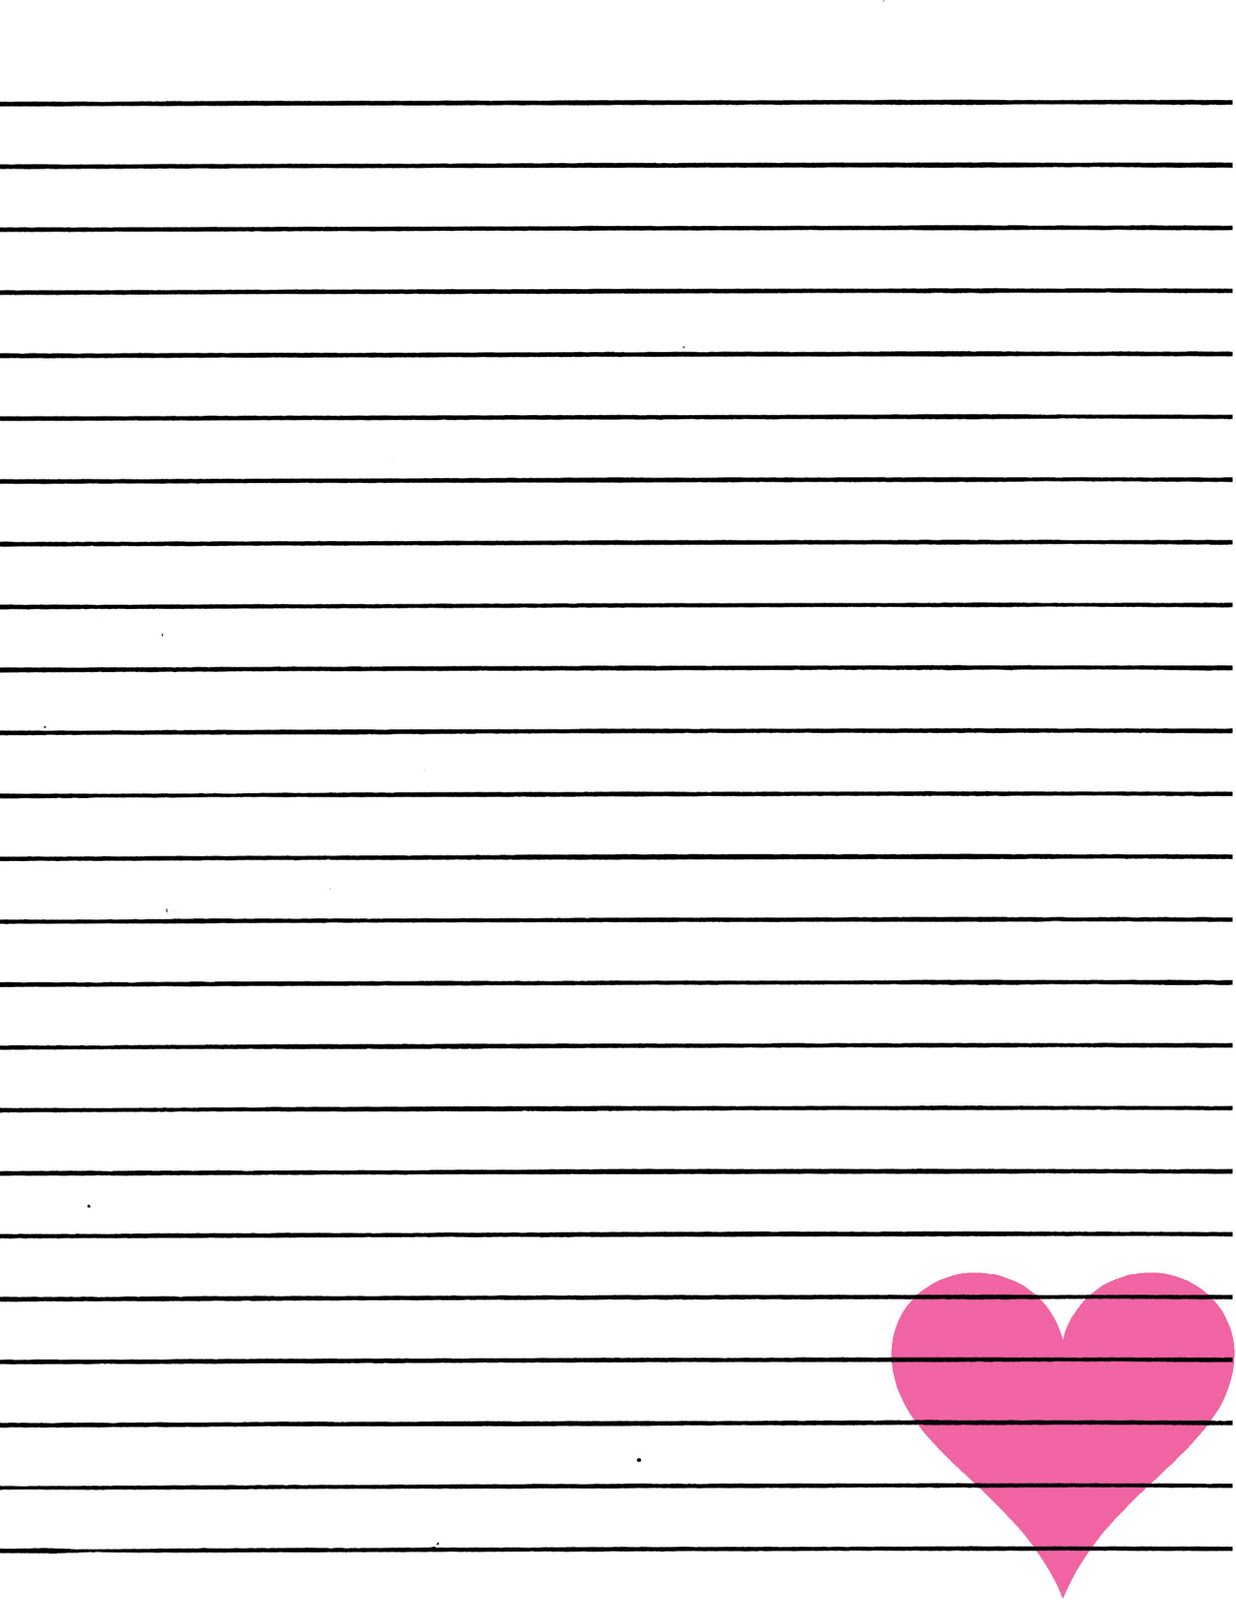 6-best-images-of-thank-you-note-paper-printable-thank-you-letter-writing-paper-template-for